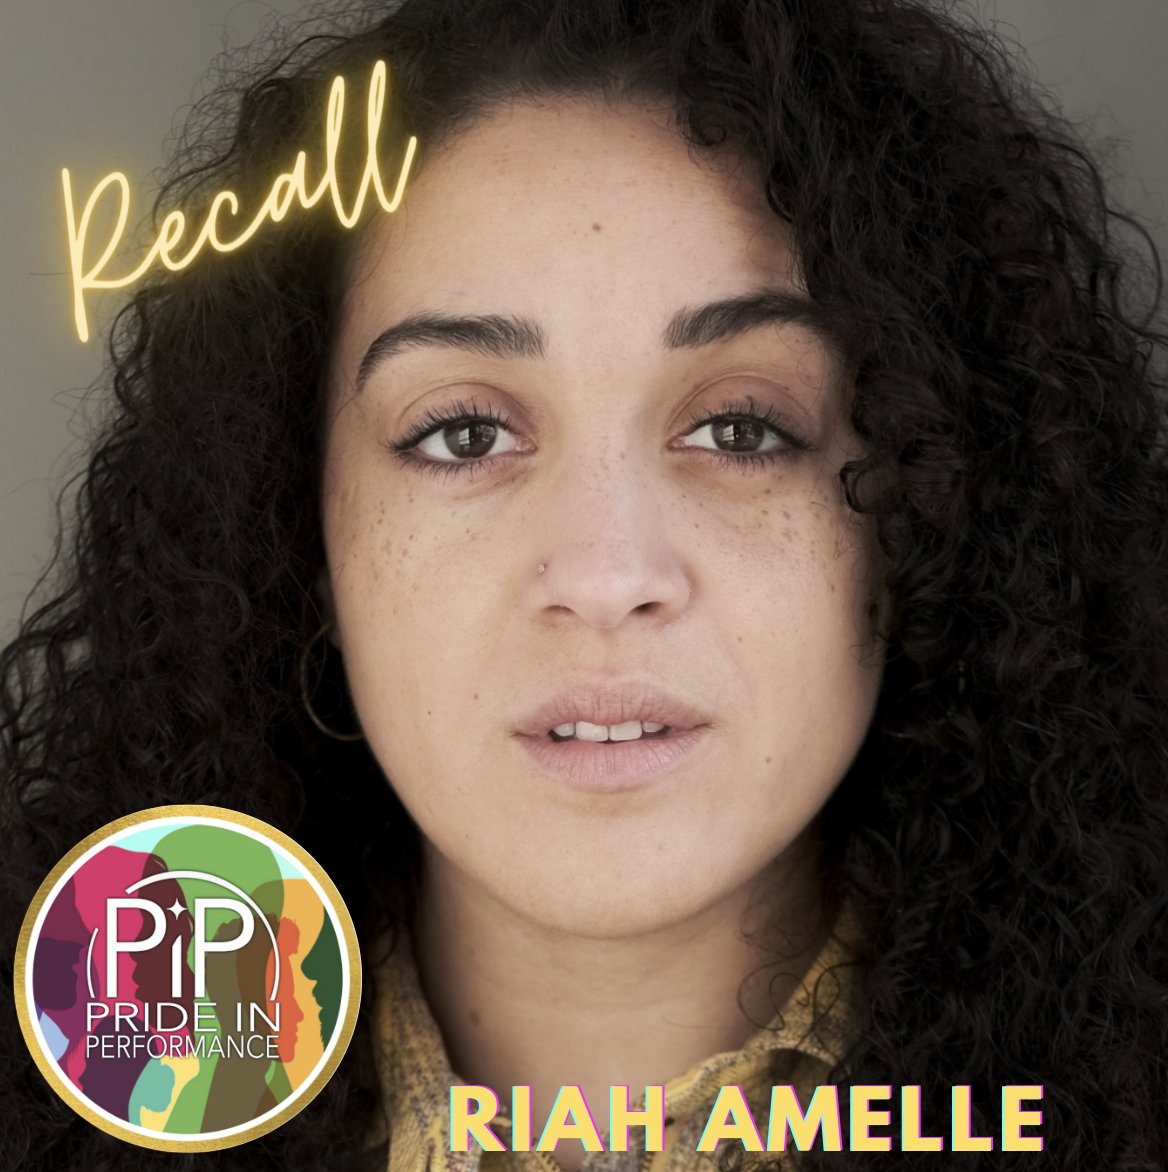 WE'RE PiPPIN’ CROSSING EVERYTHING!!!
👋 Recall Alert For RIAH AMELLE 👋
@riahamelle enjoying a lovely #Recall #Casting for a #Commercial
spotlight.com/7570-3420-5576
#PositivelyPiP
#AuditionAlert 
#Recall